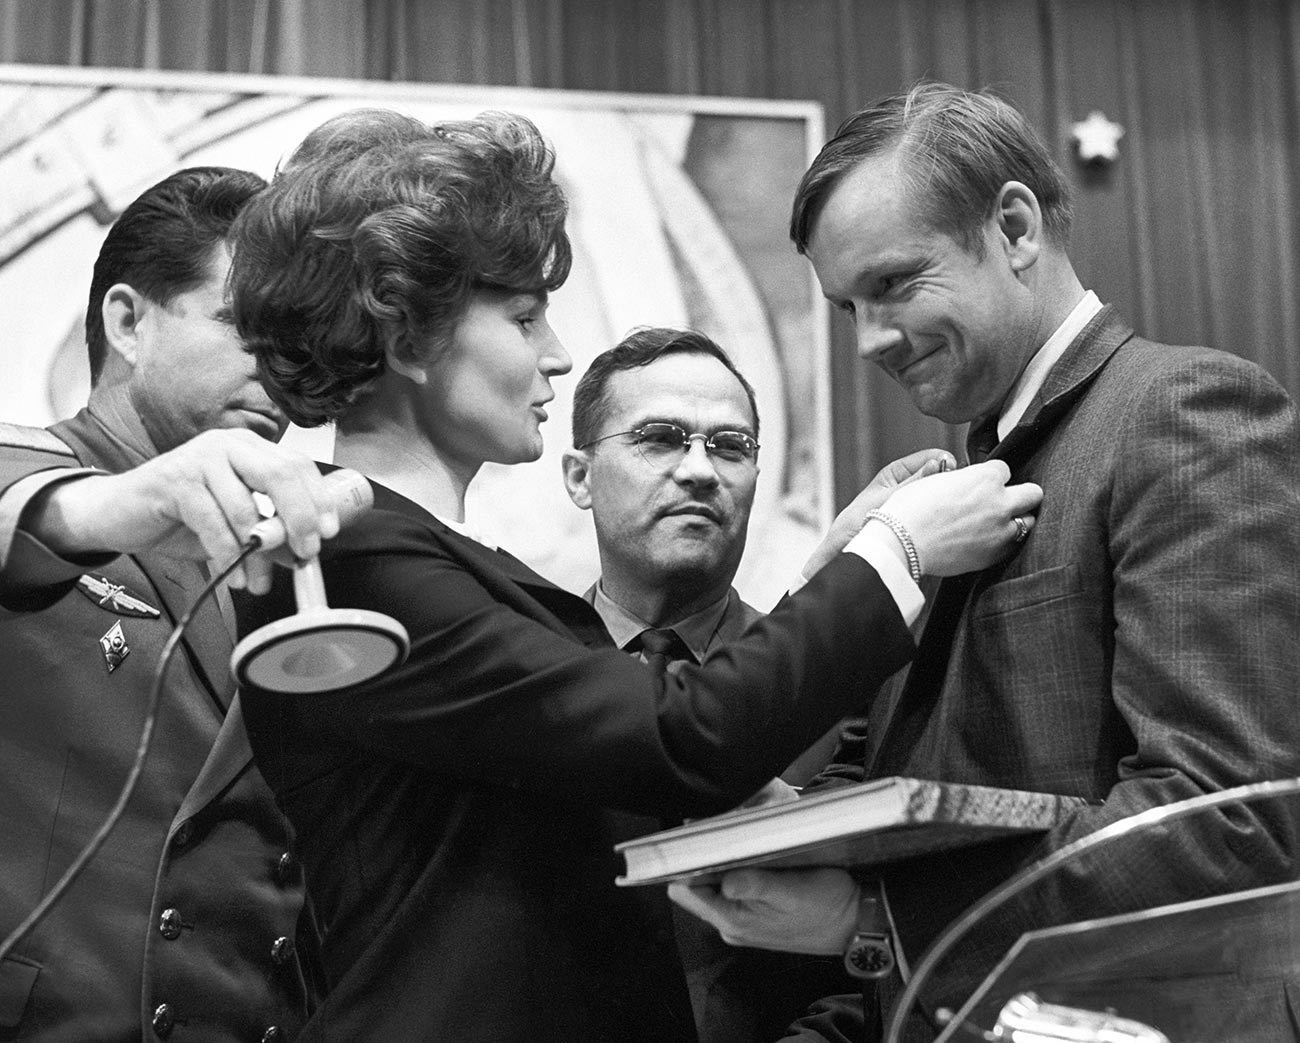 Moscow region. American astronaut Neil Armstrong visited Star City. Valentina Tereshkova presented a souvenir to Neil Armstrong.